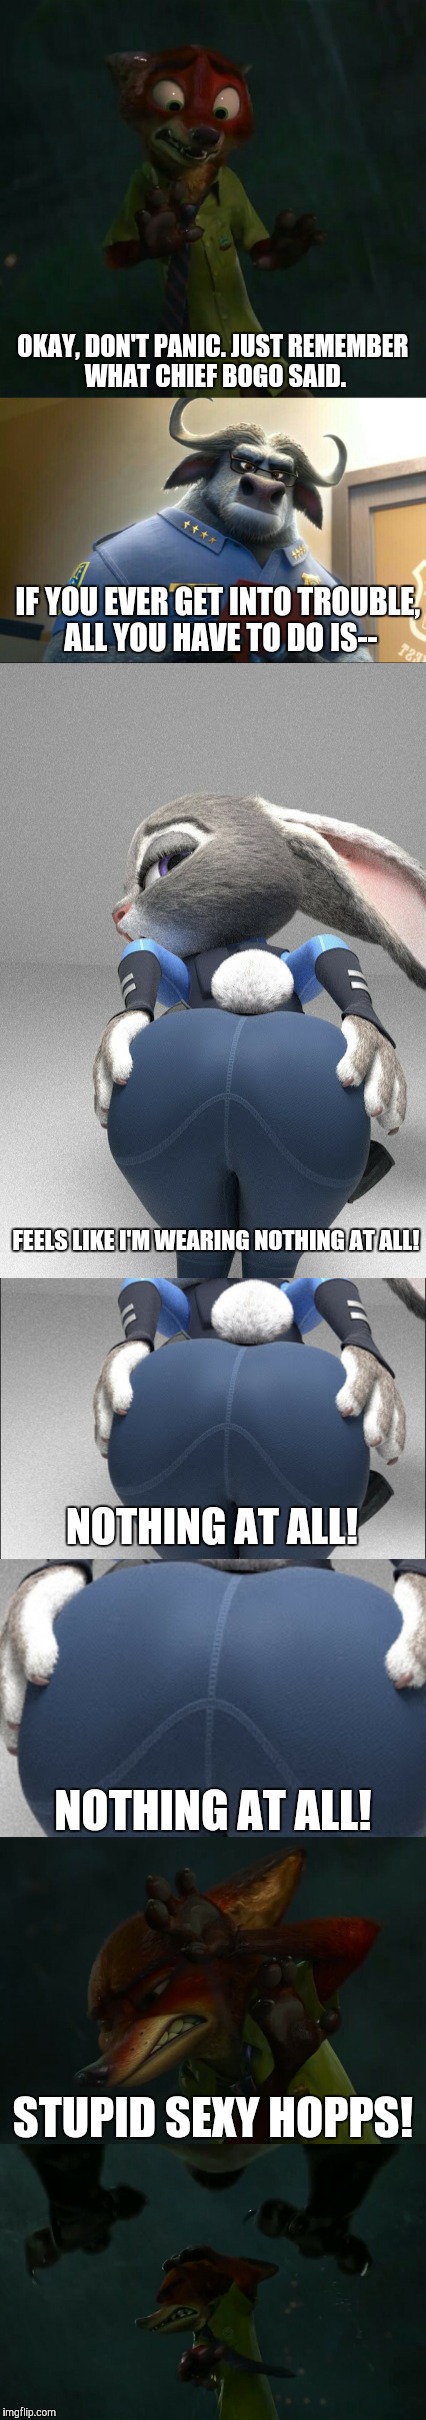 Stupid sexy Judy Hopps | OKAY, DON'T PANIC. JUST REMEMBER WHAT CHIEF BOGO SAID. IF YOU EVER GET INTO TROUBLE, ALL YOU HAVE TO DO IS--; FEELS LIKE I'M WEARING NOTHING AT ALL! NOTHING AT ALL! NOTHING AT ALL! STUPID SEXY HOPPS! | image tagged in zootopia,judy hopps,zootopia fox,funny,memes,parody | made w/ Imgflip meme maker